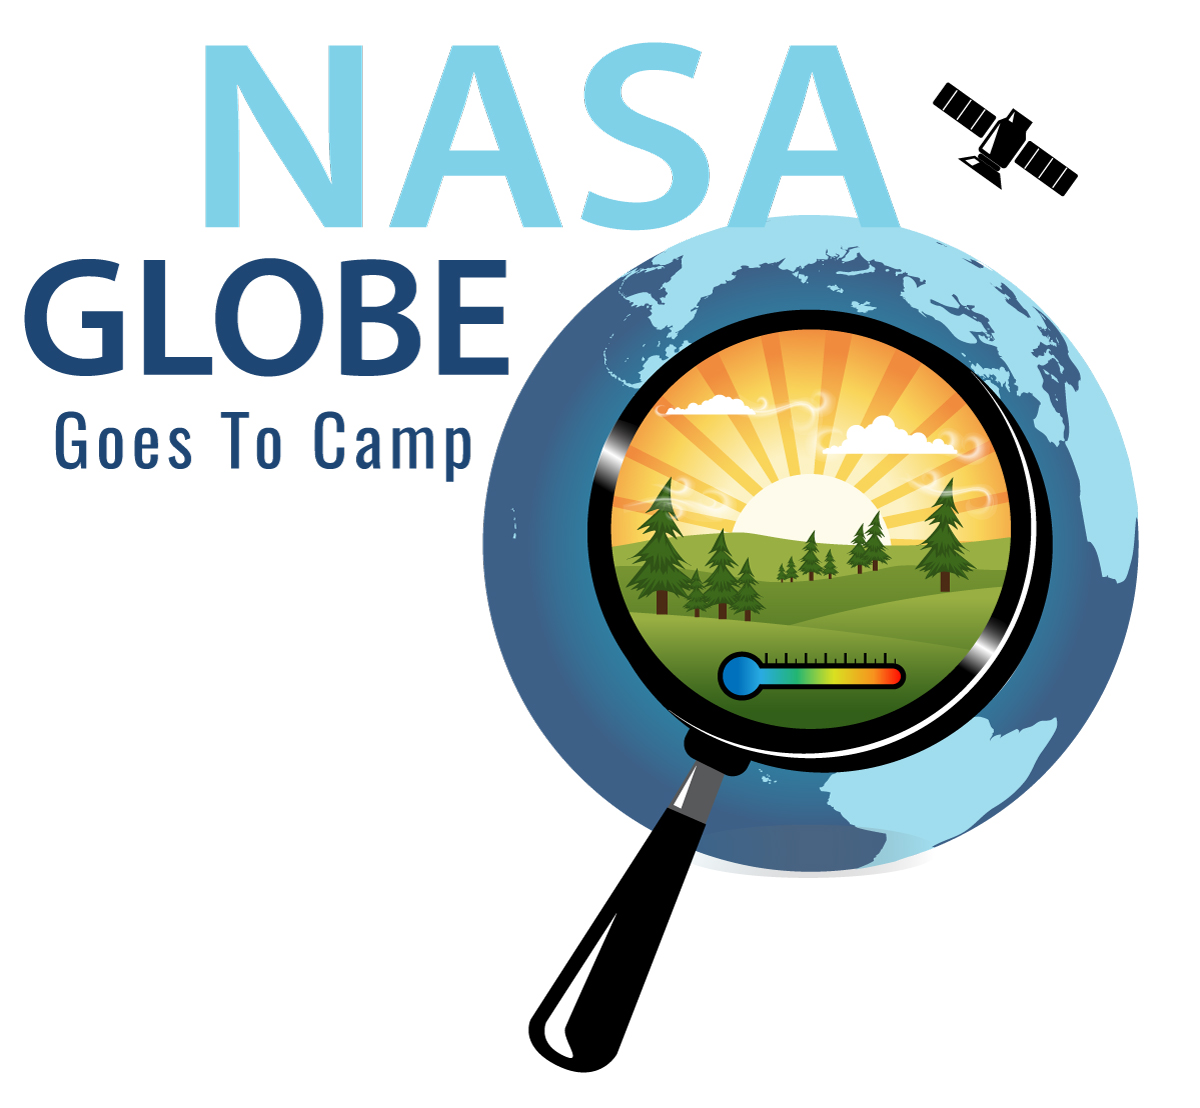 NASA GLOBE Goes to Camp logo with a magnifying glass over the Earth with a nature scene visible in the glass